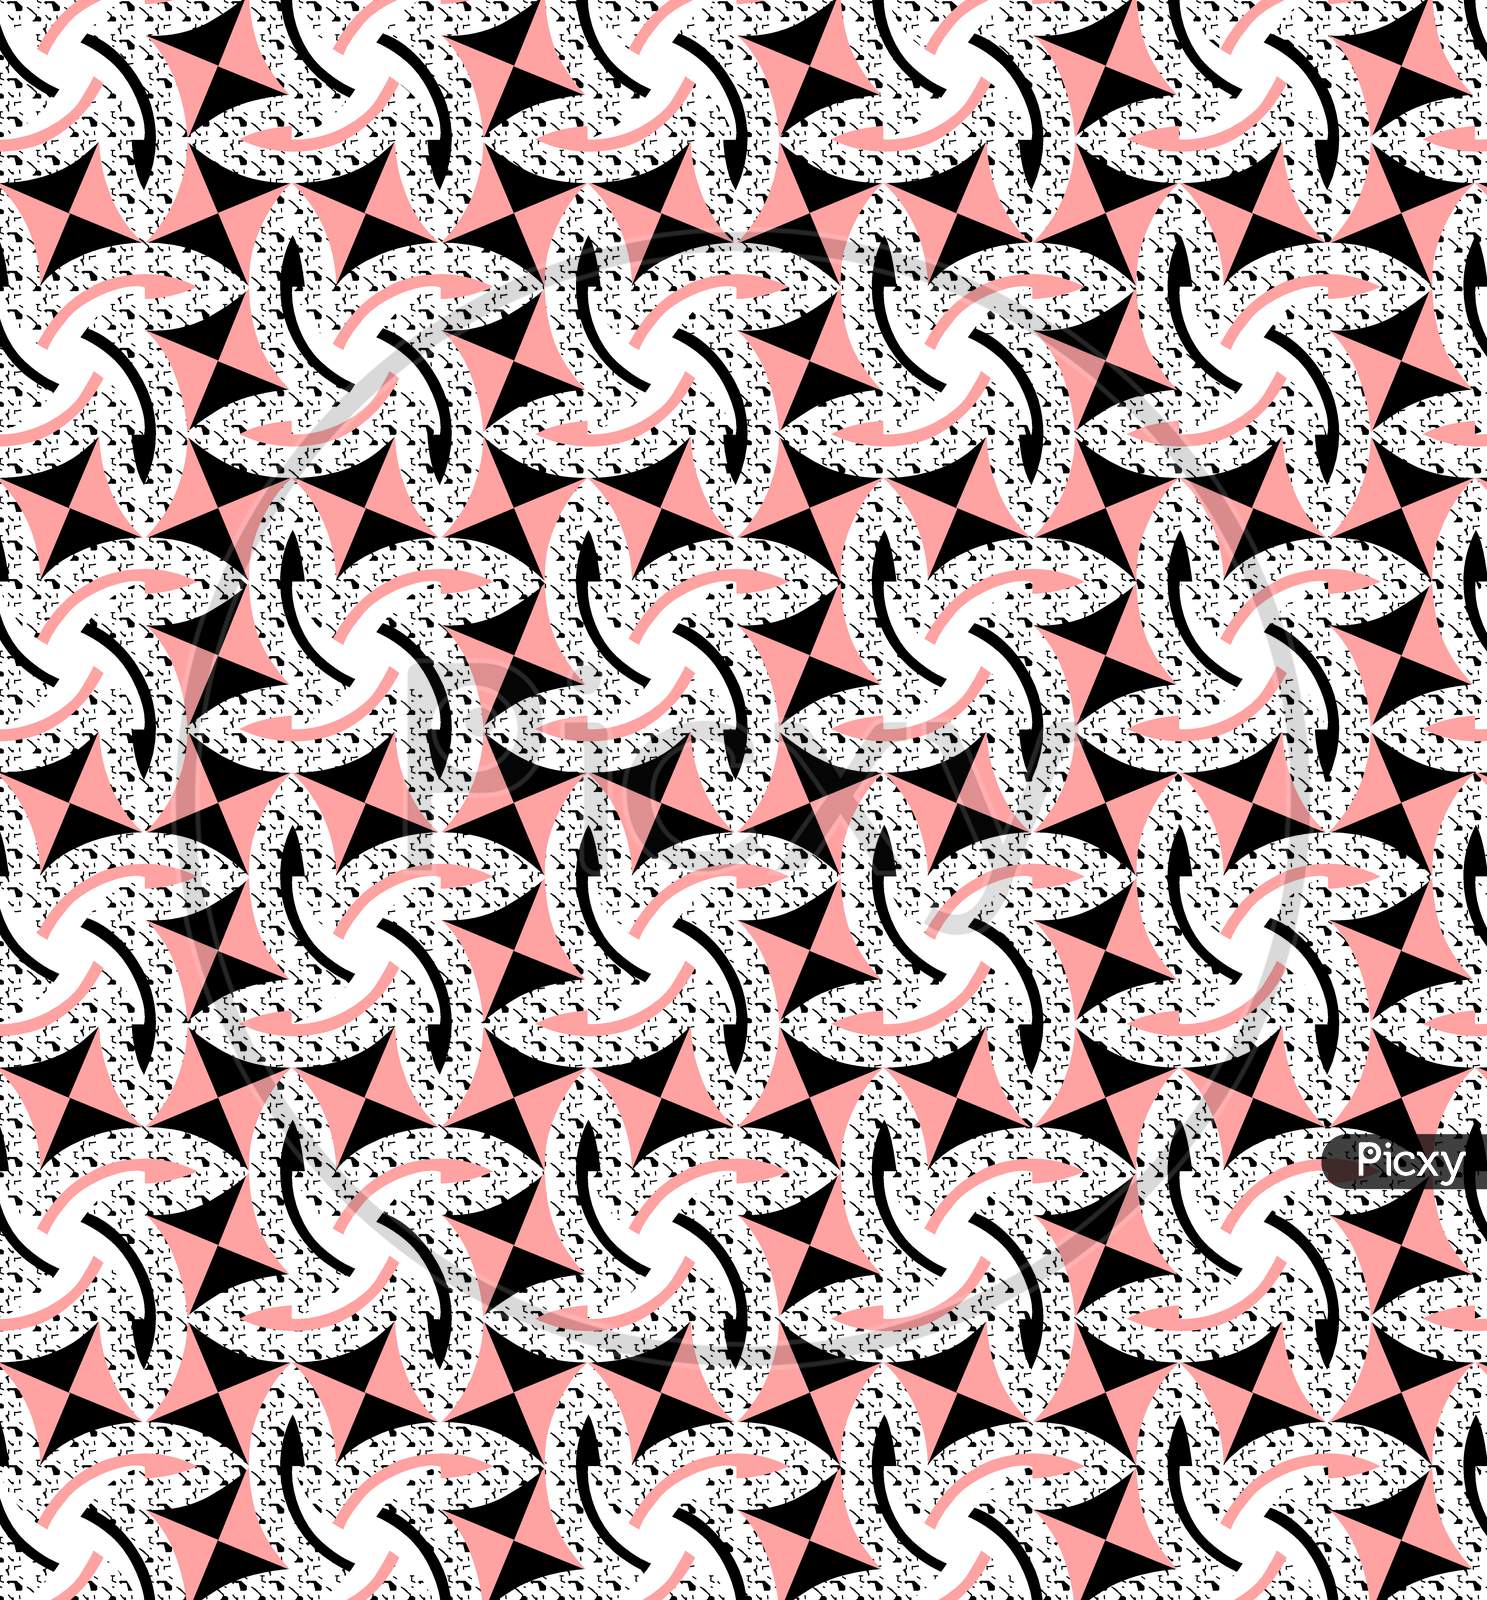 Geometric Pattern With Curved Lines, Dots, Shabby Shape Elements, Colorful Spray Paint Ink. Grunge Urban Pattern For Boy, Girl, Sport Clothes, Wrapping Paper.